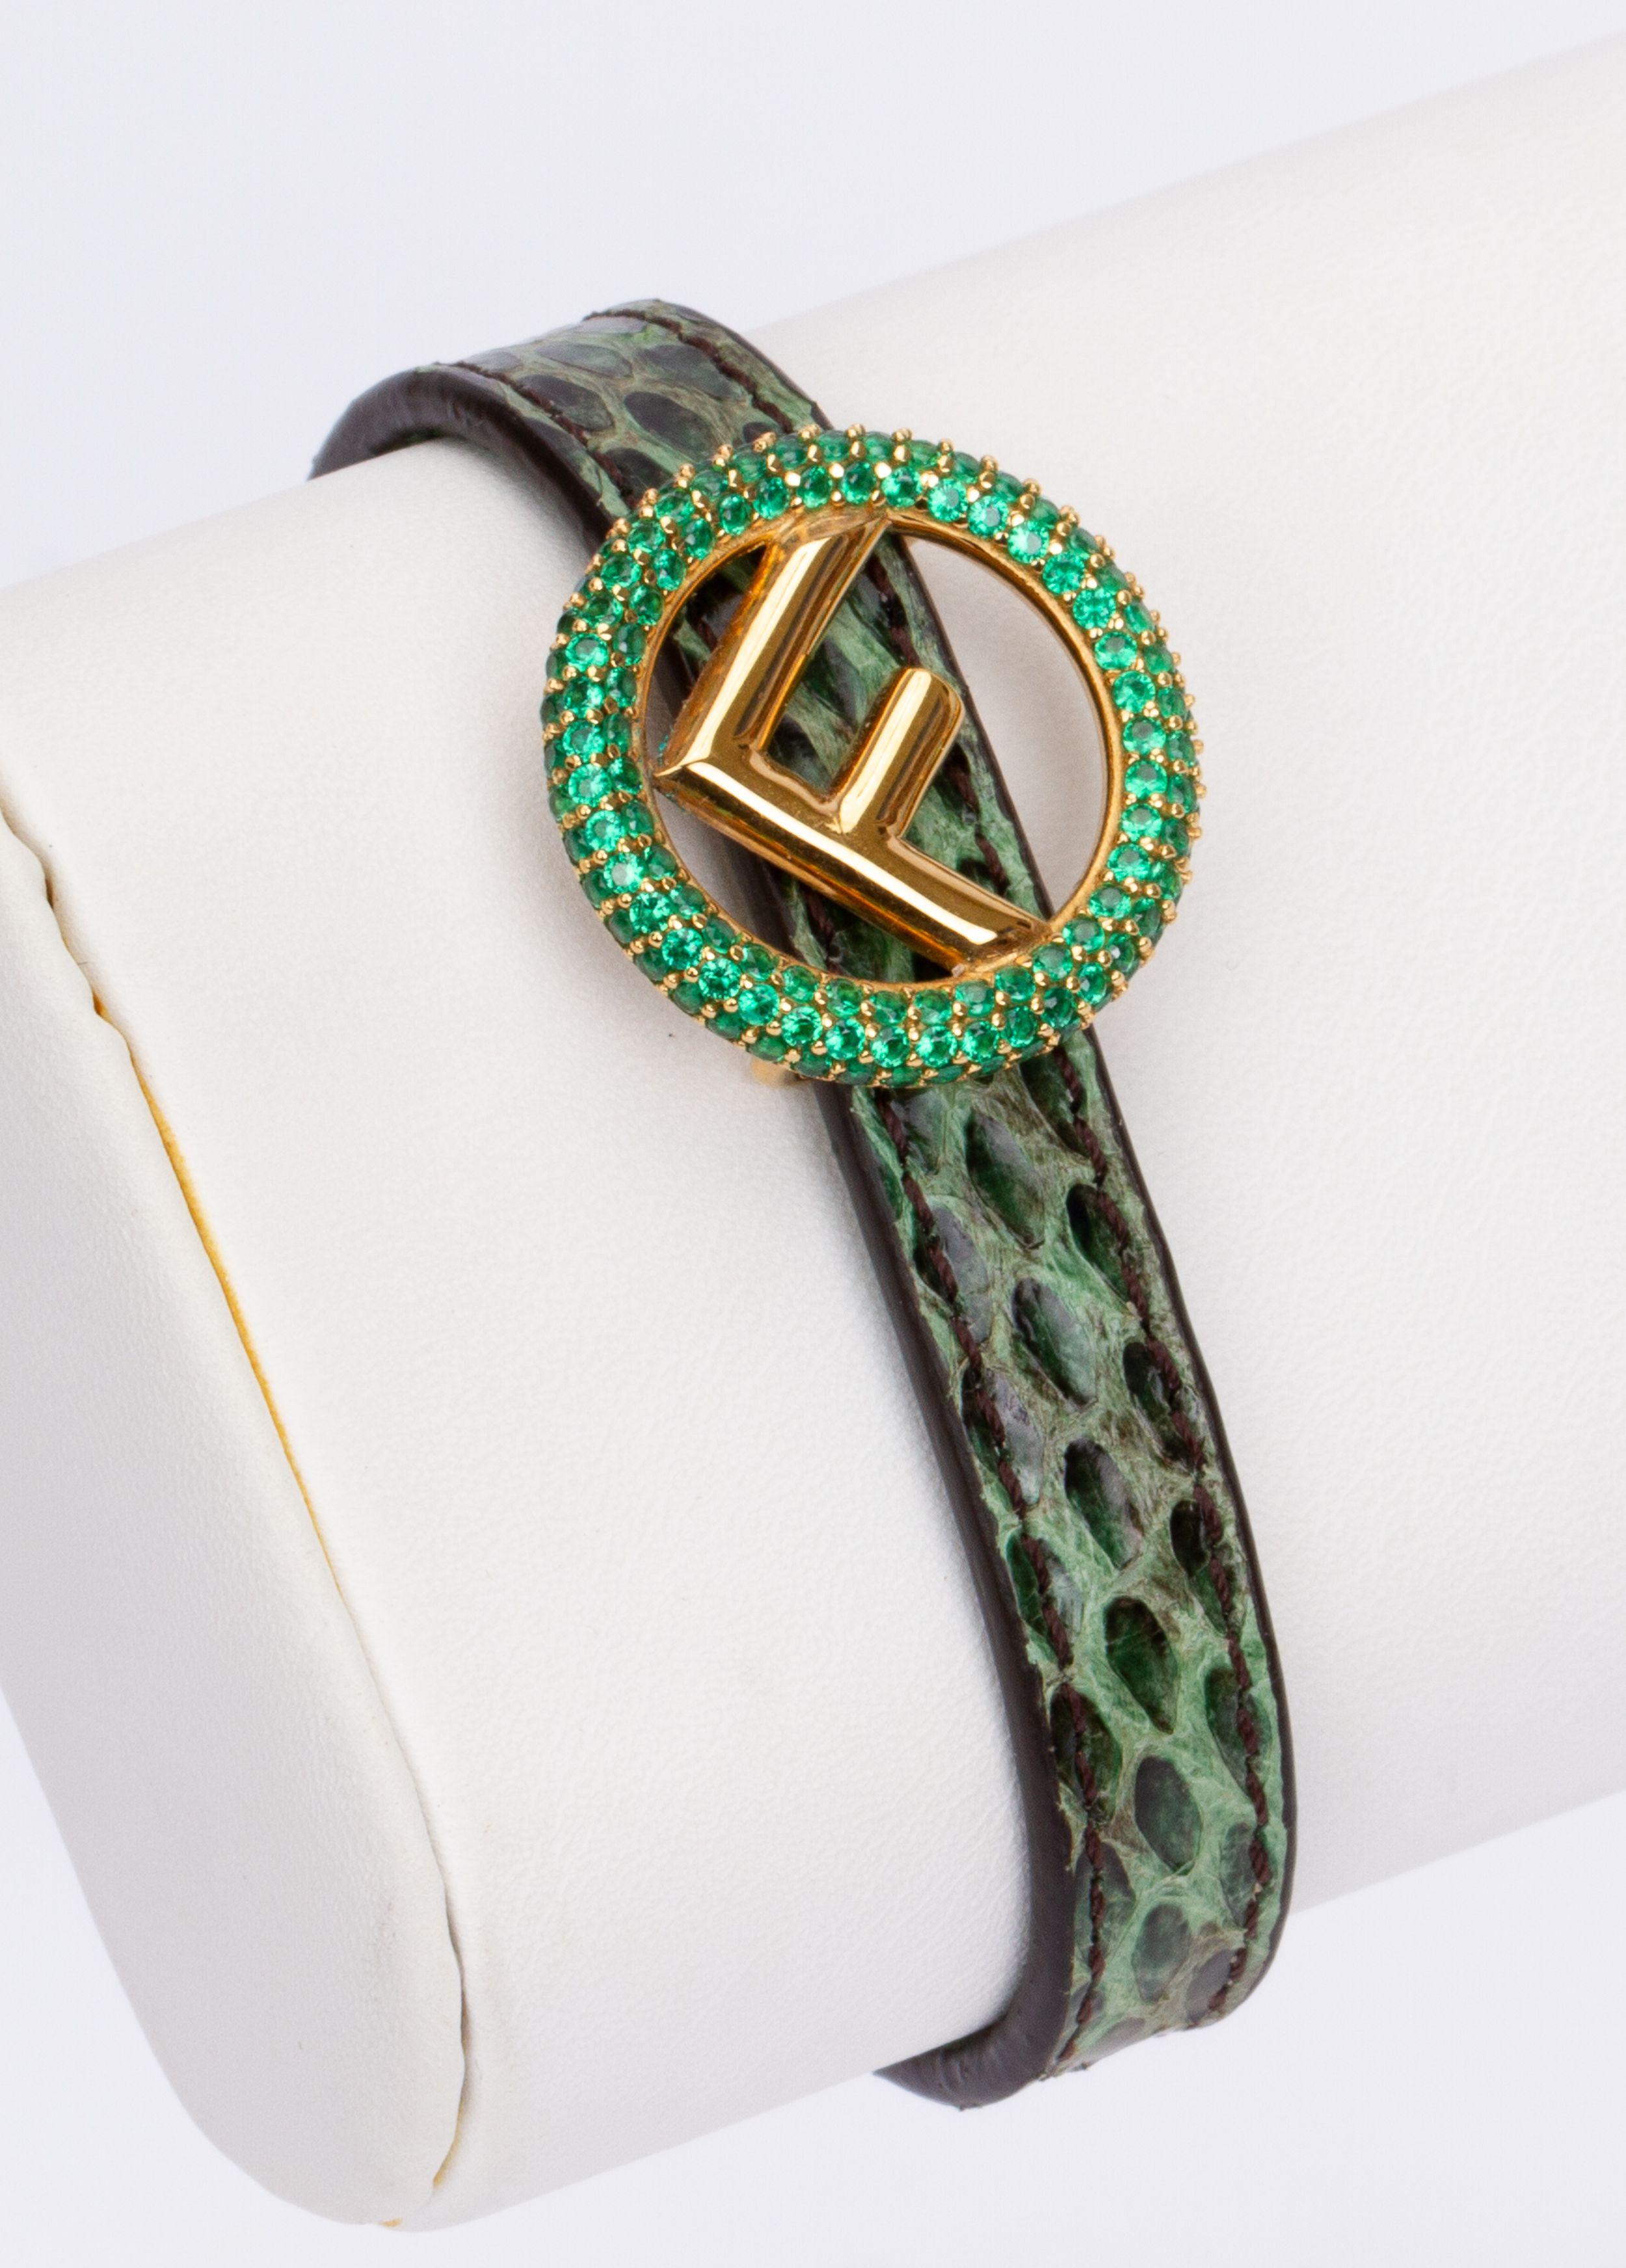 Fendi bracelet in green with a leather band patterned like snake skin. The clasp is round and in the inside is singular F. The piece is brand new and comes with the tag and original box.